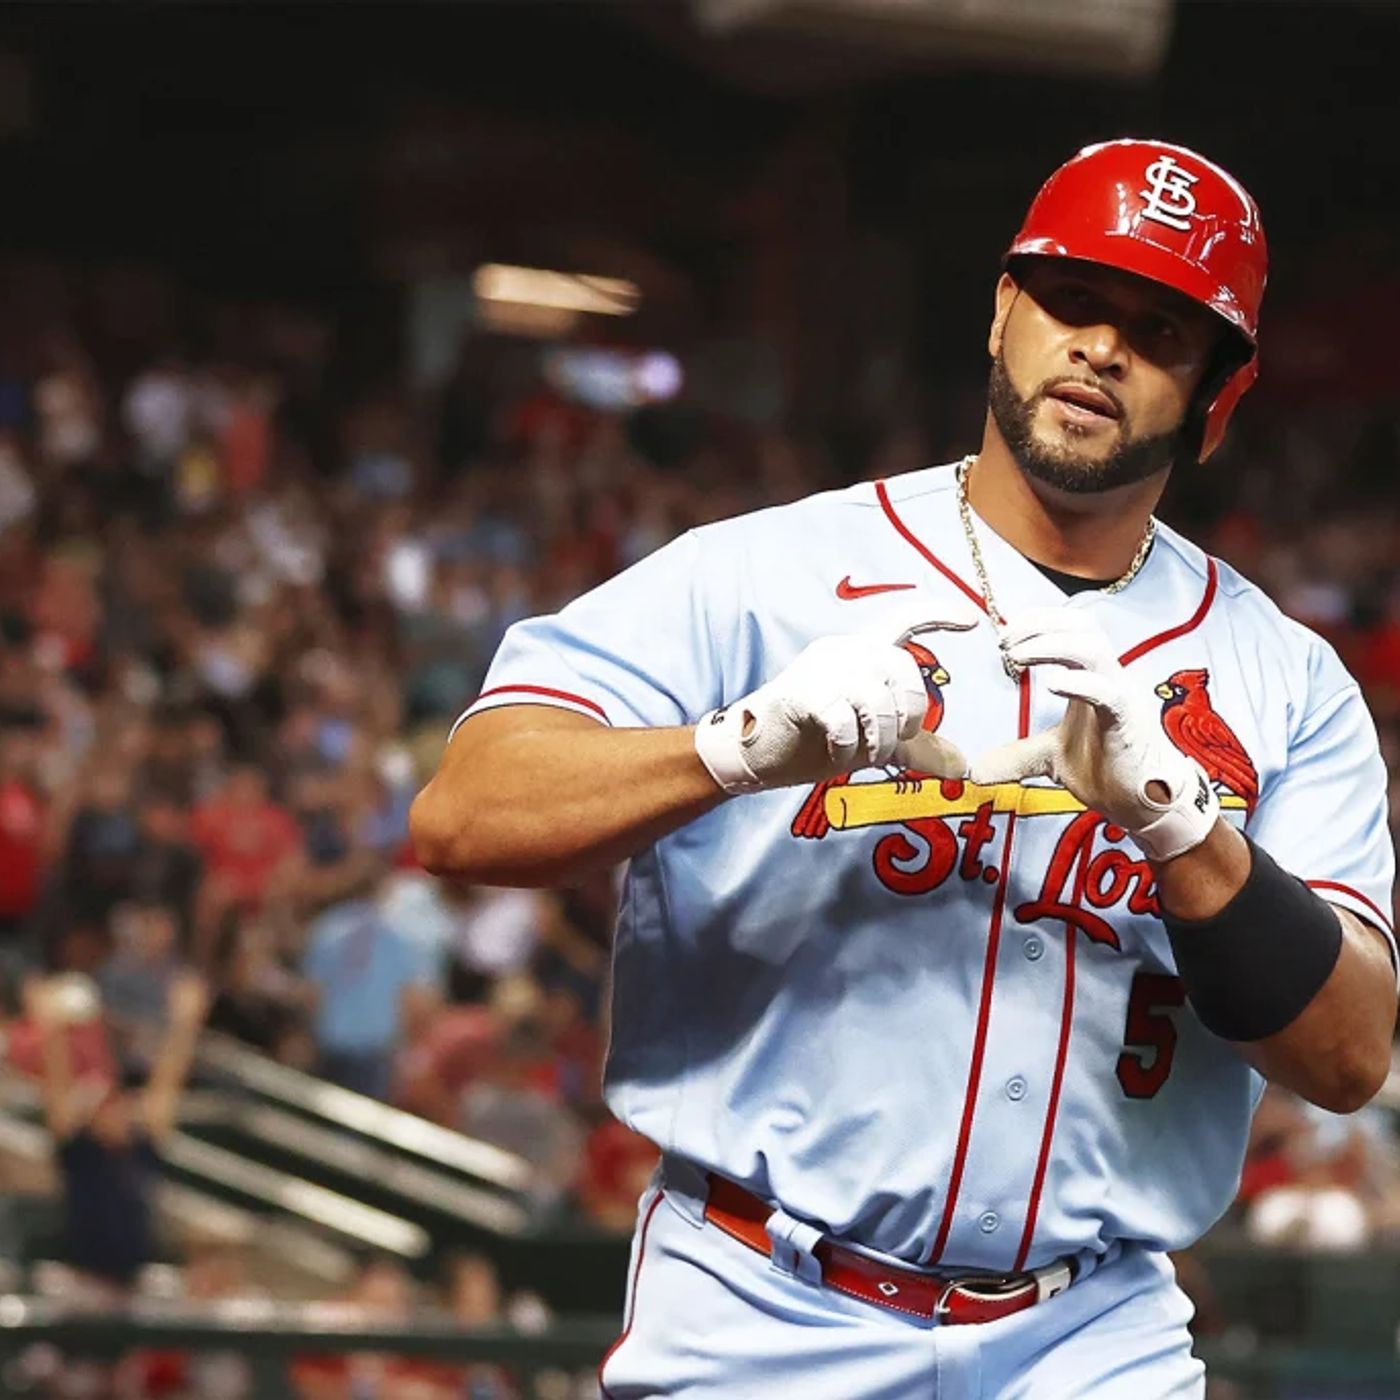 Albert Pujols Legacy in 700 Club Heading to the Playoffs then Retirement